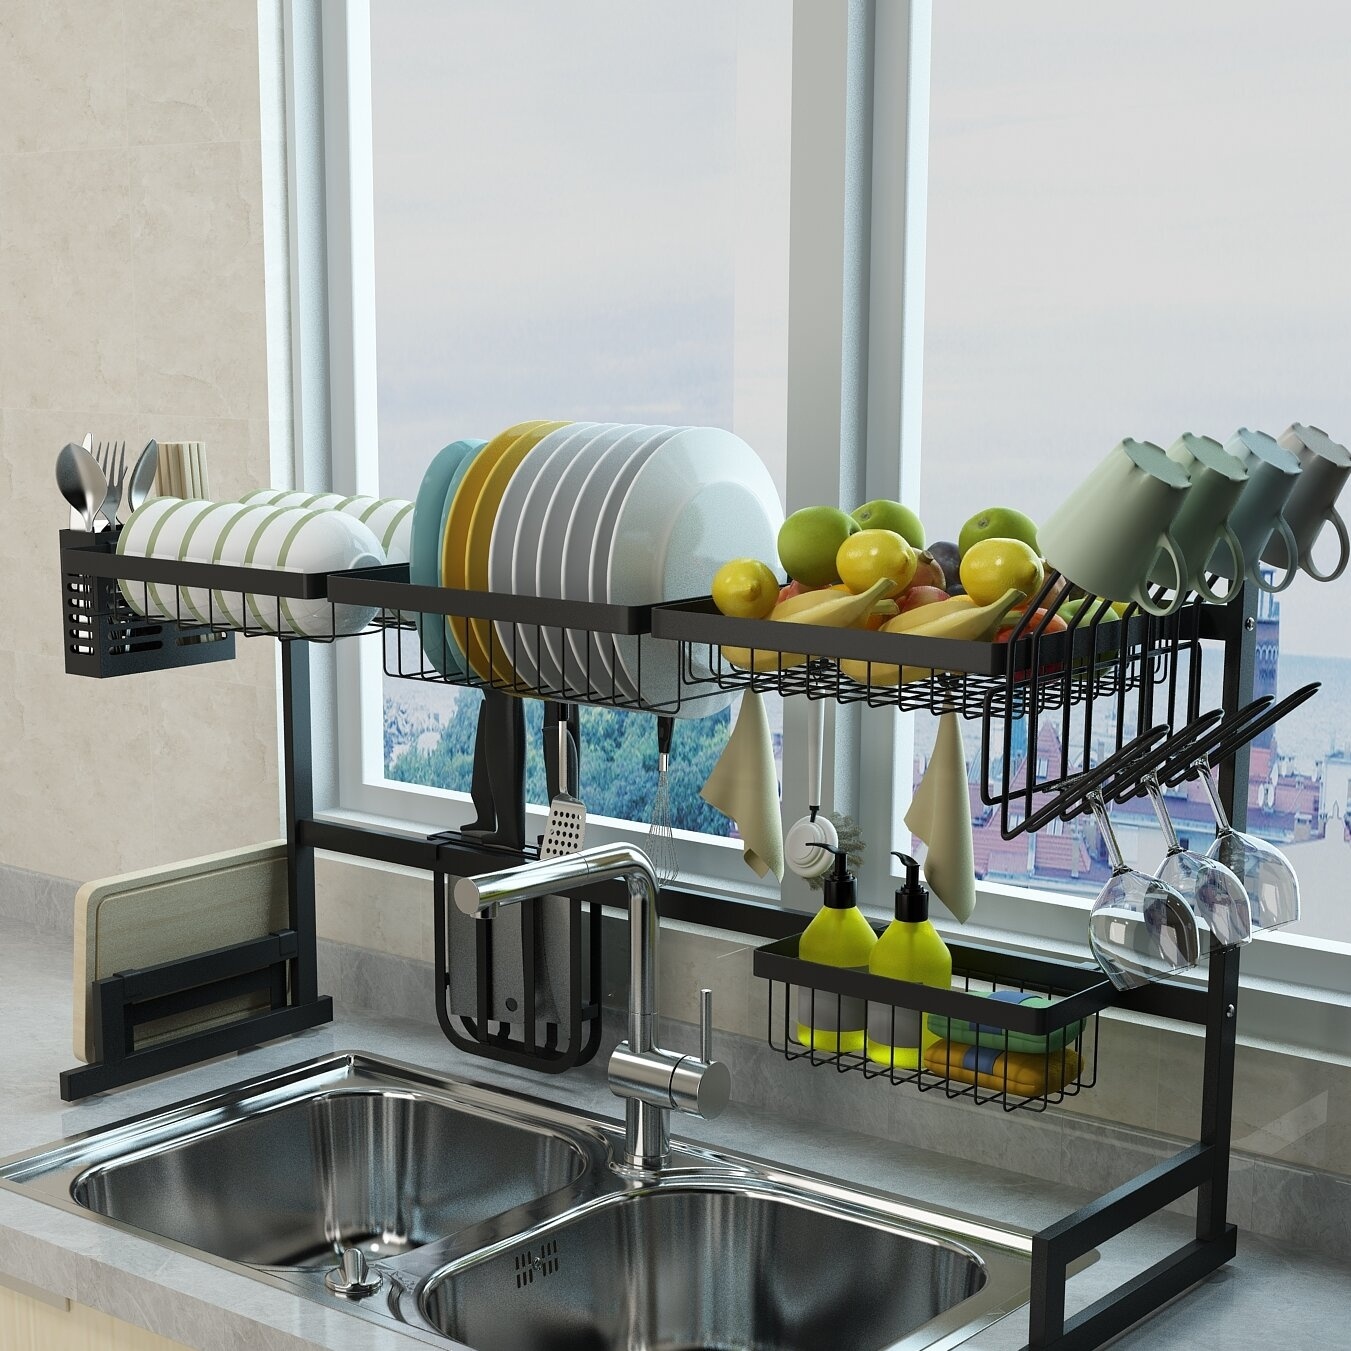 PremiumRacks Stainless Steel Over The Sink Dish Rack - Roll Up - Durab